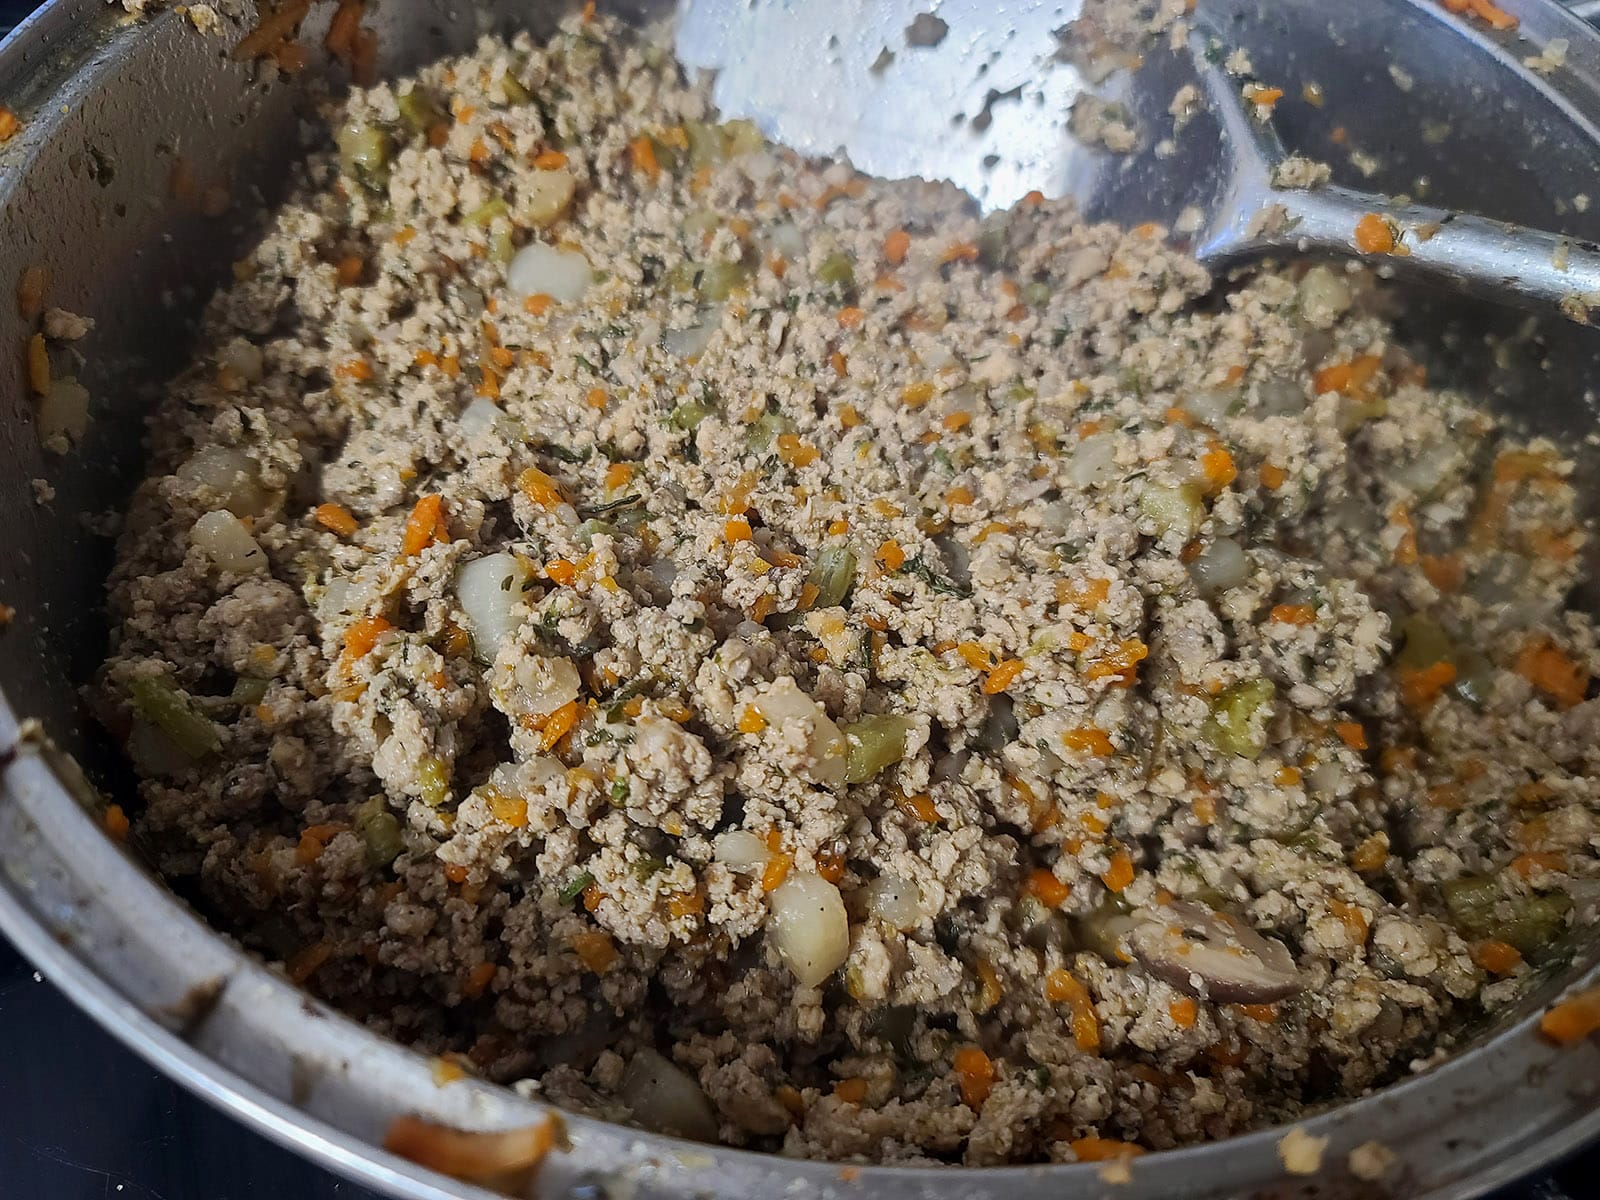 A close up photo of the finished meat pie filling.